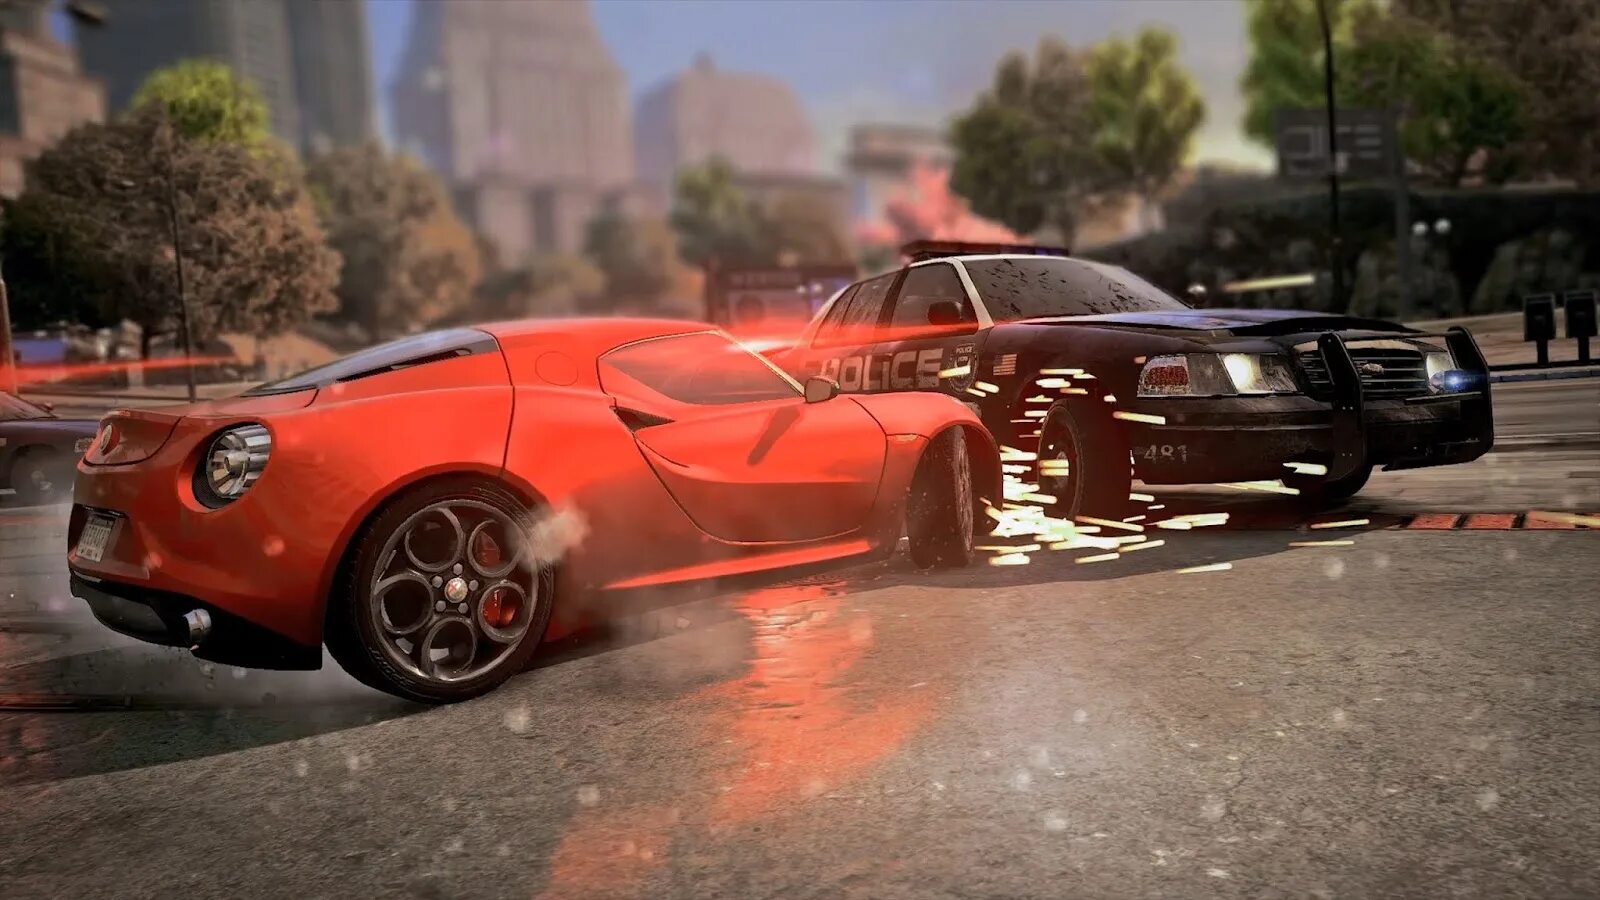 Most wanted redux. Need for Speed most wanted 2012. Машины DLC most wanted 2012. Нид фор СПИД редукс. NFS most wanted 2012 машины DLC.